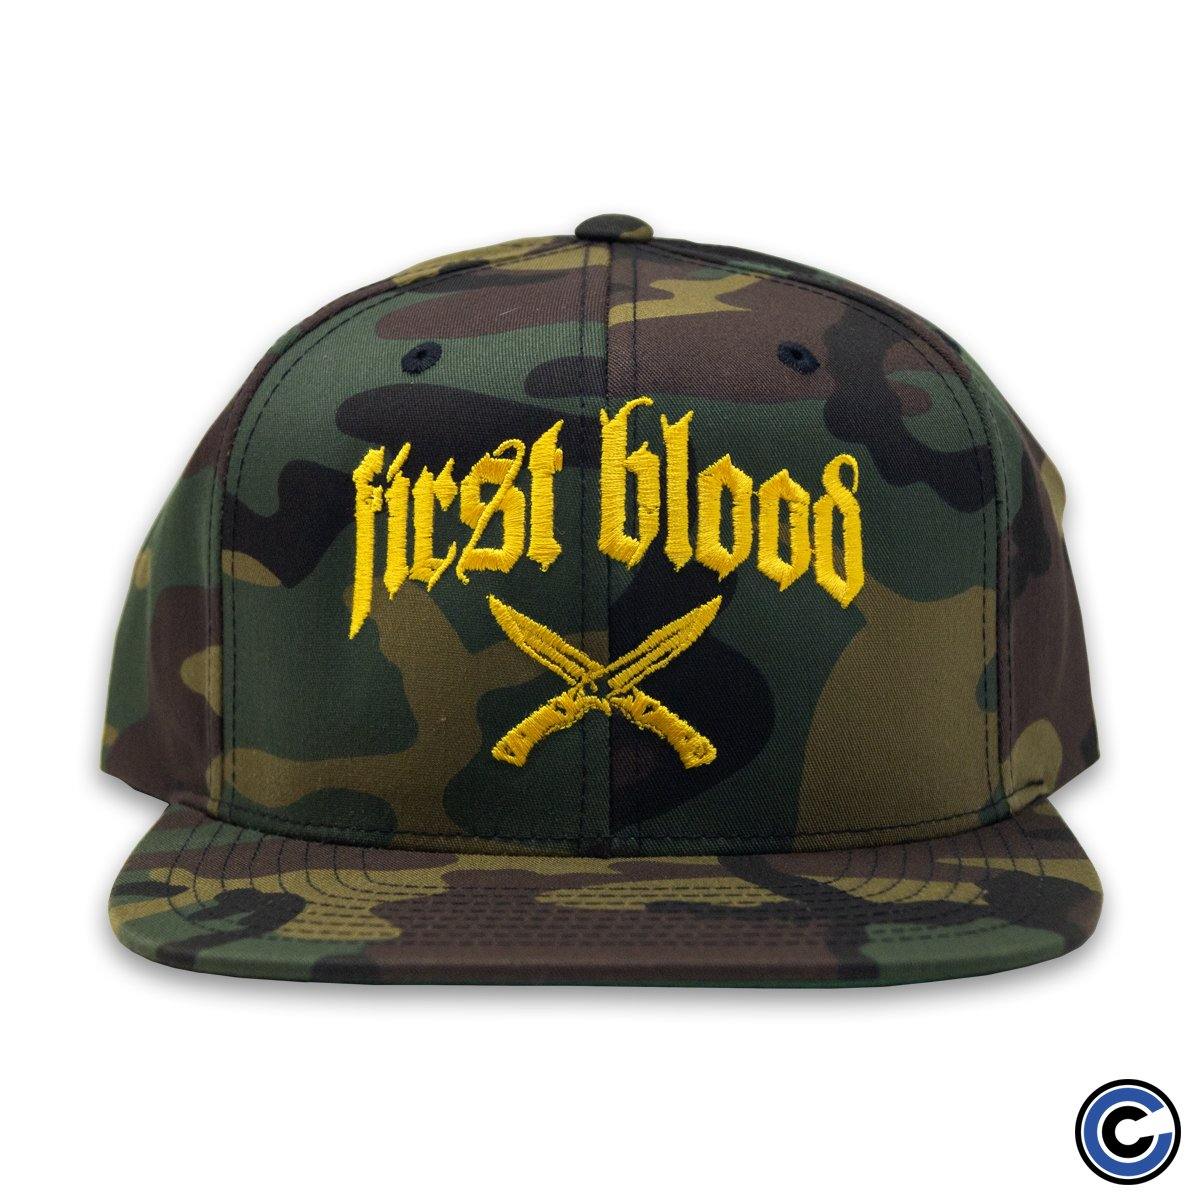 Buy – First Blood "Knives" Snapback – Band & Music Merch – Cold Cuts Merch